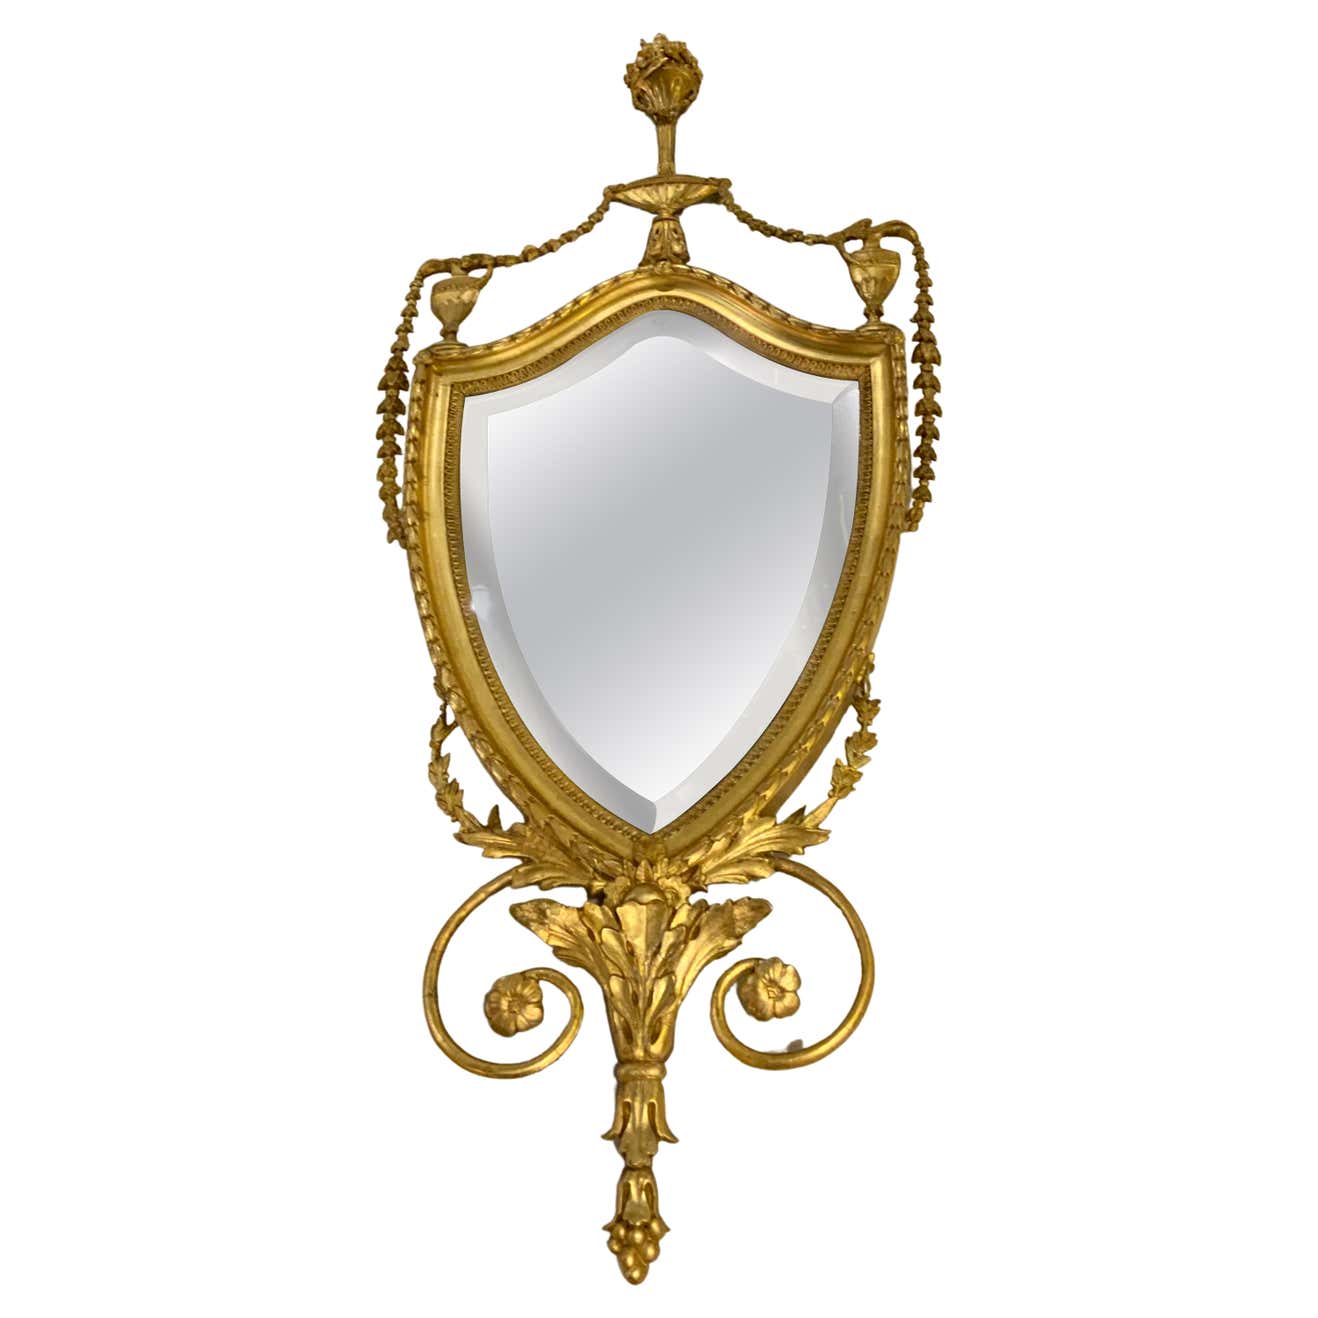 Giltwood Edwardian Shield Form Mirror In The Adam Taste For Sale At 1stdibs